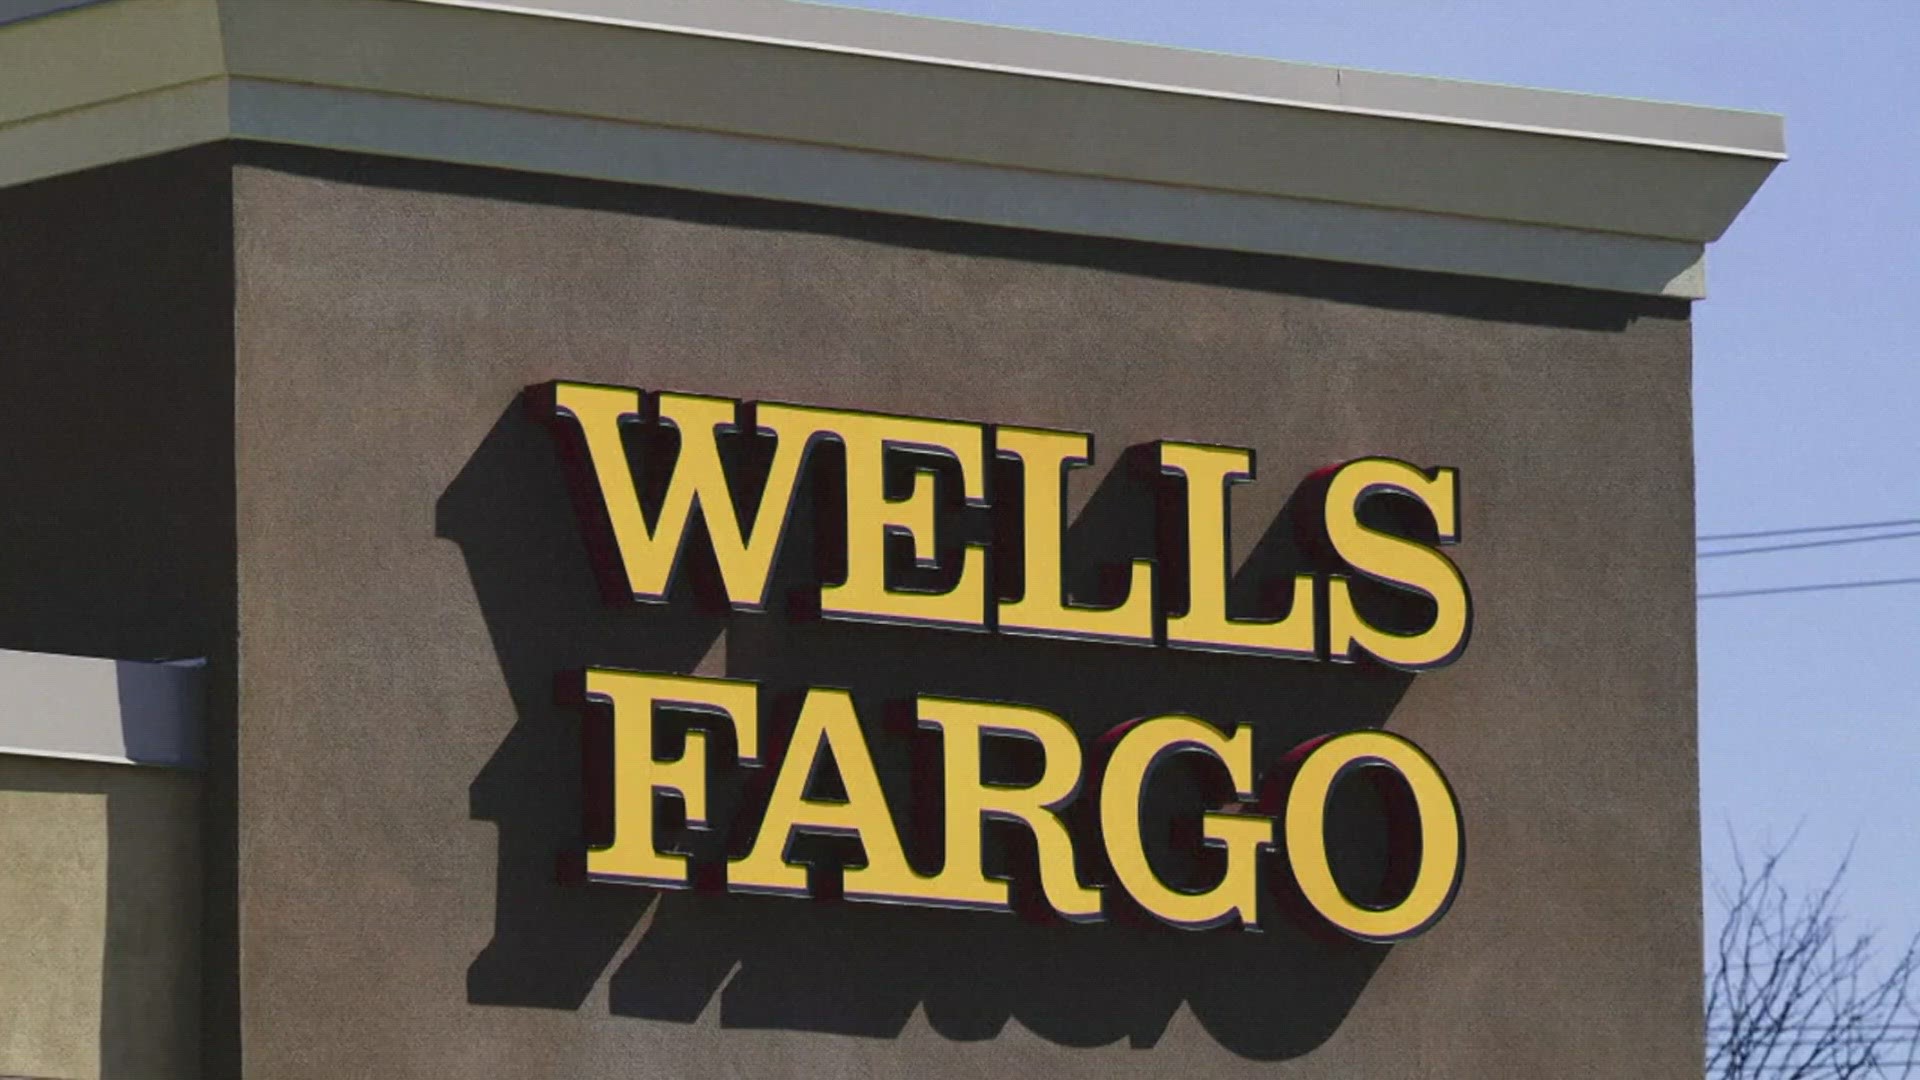 Some Wells Fargo customers posted online that their direct deposits and scheduled paychecks were missing from their online banking accounts Friday.